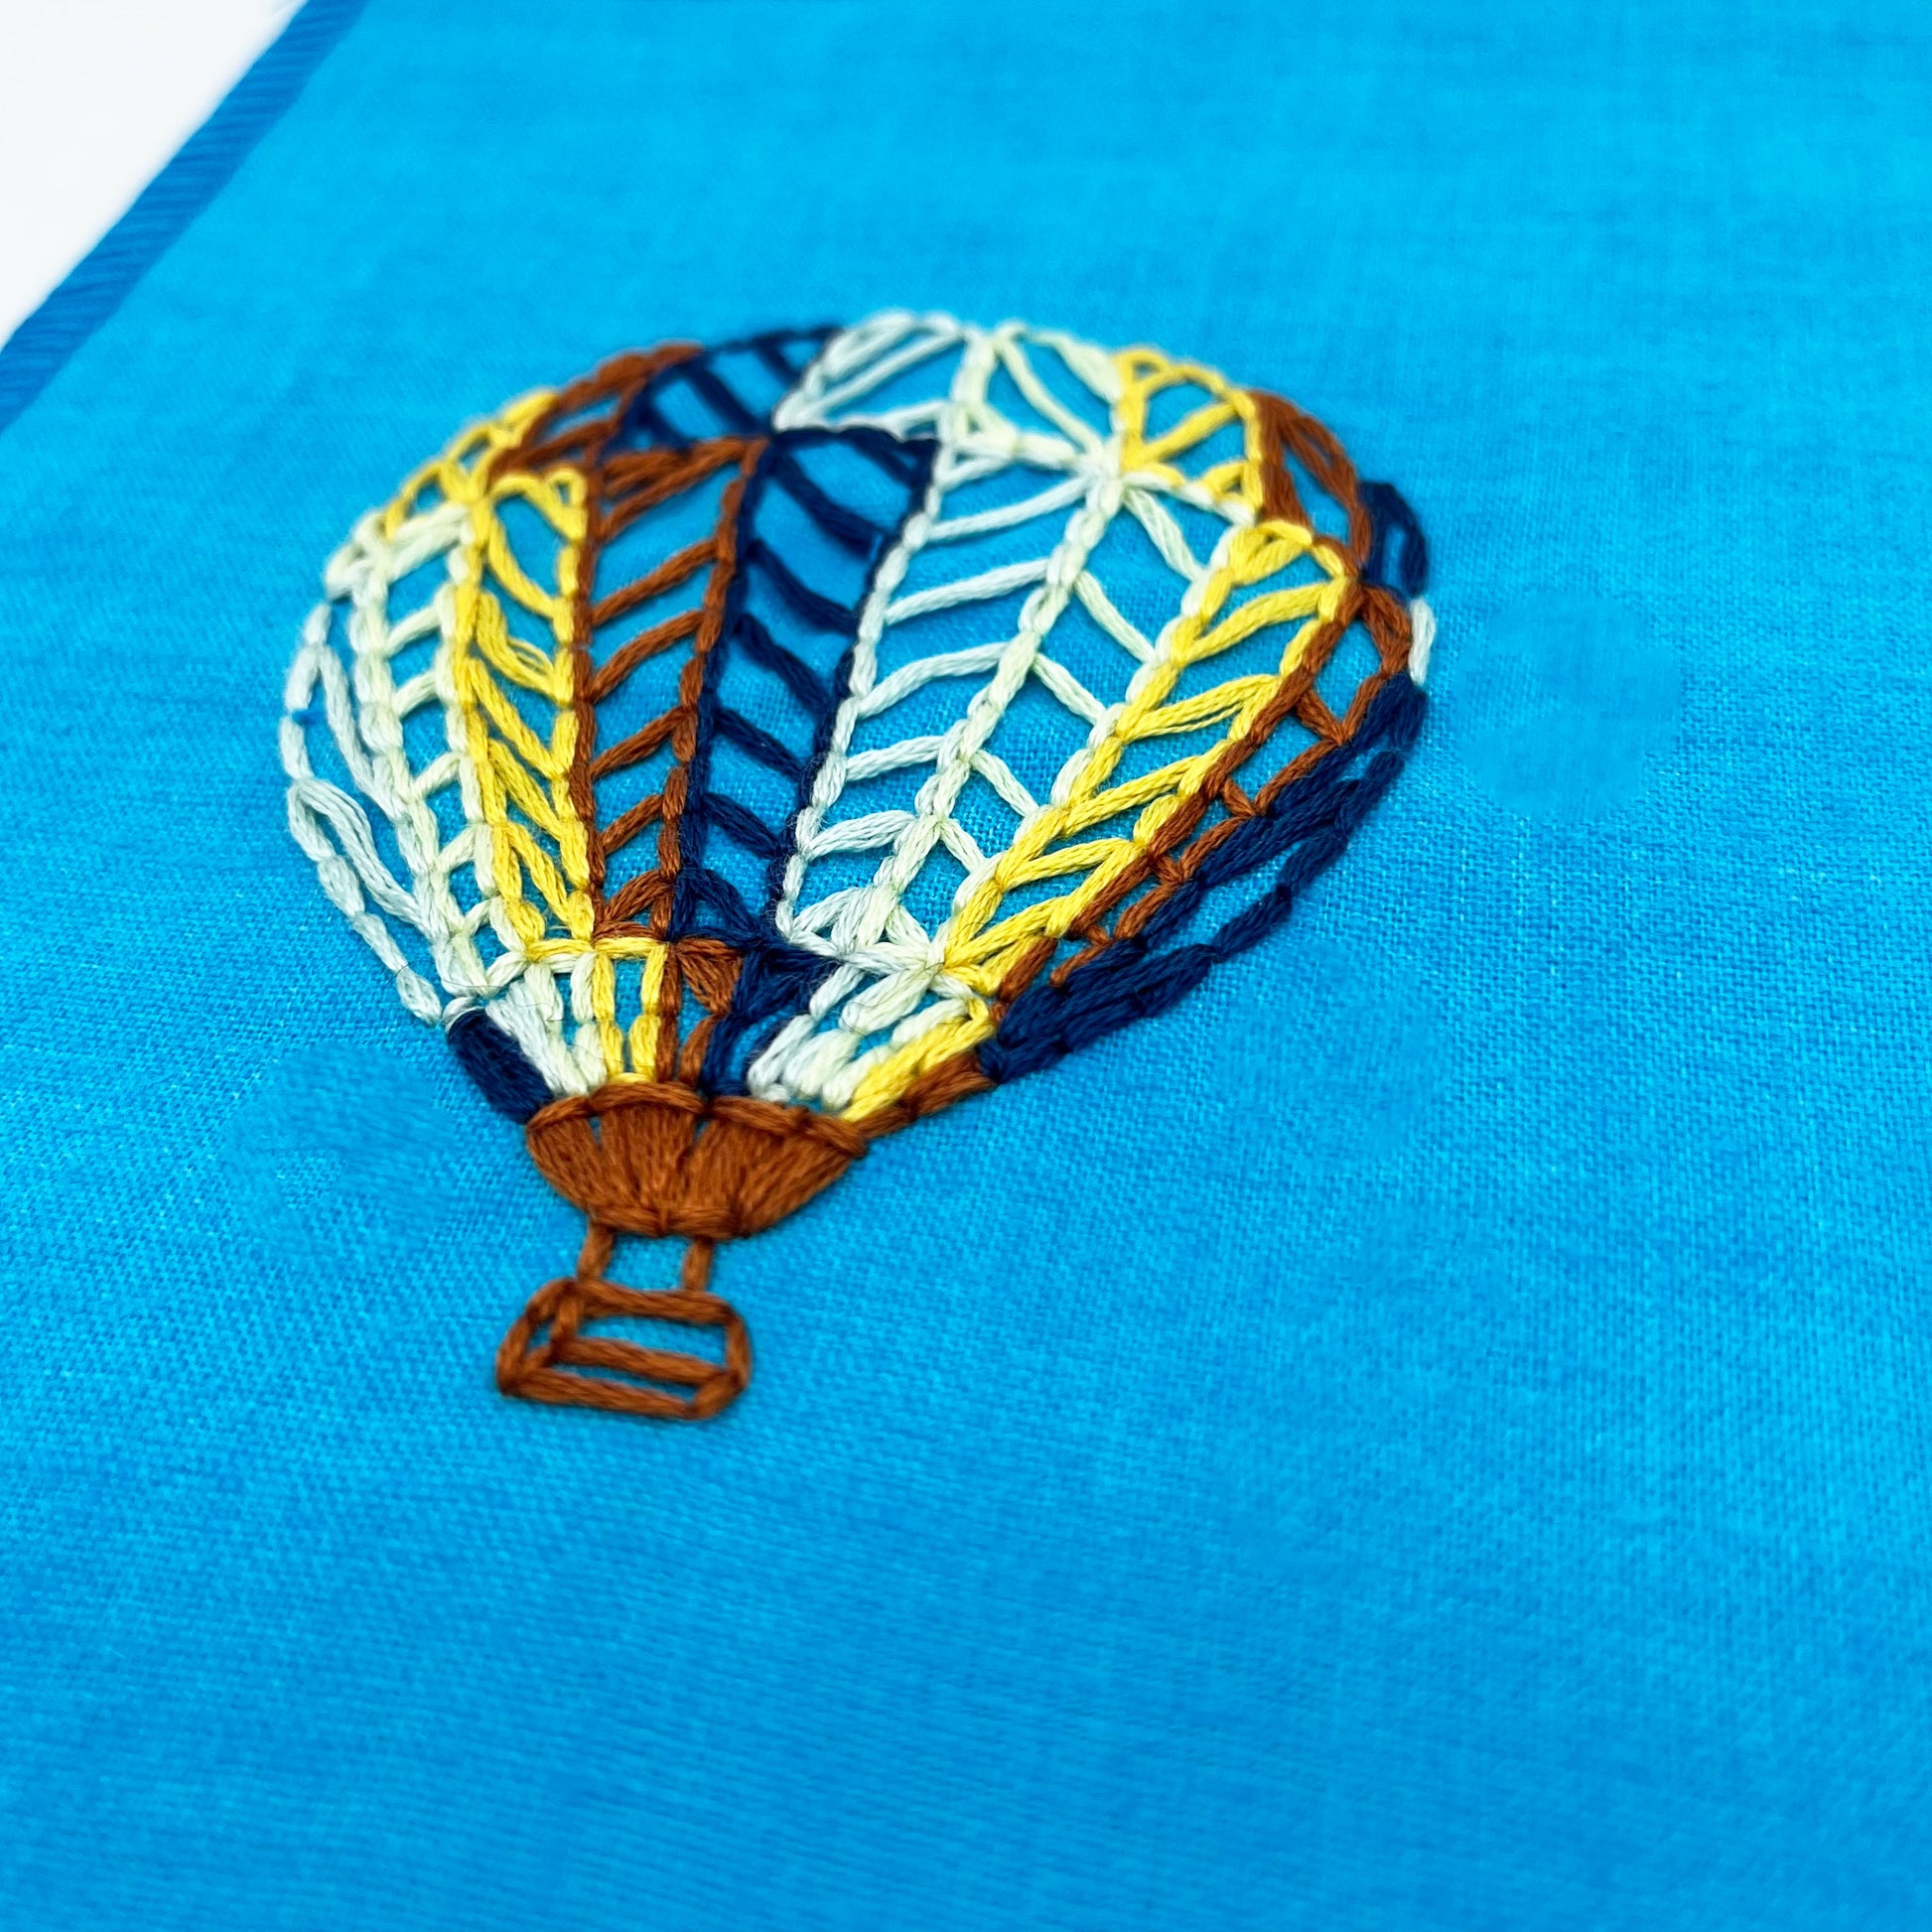 a close up angled view of a bright blue fabric wall hanging with a hot air balloon stitched on it off center, in dark blue, light blue, light green, yellow and rust colored thread, on a white background